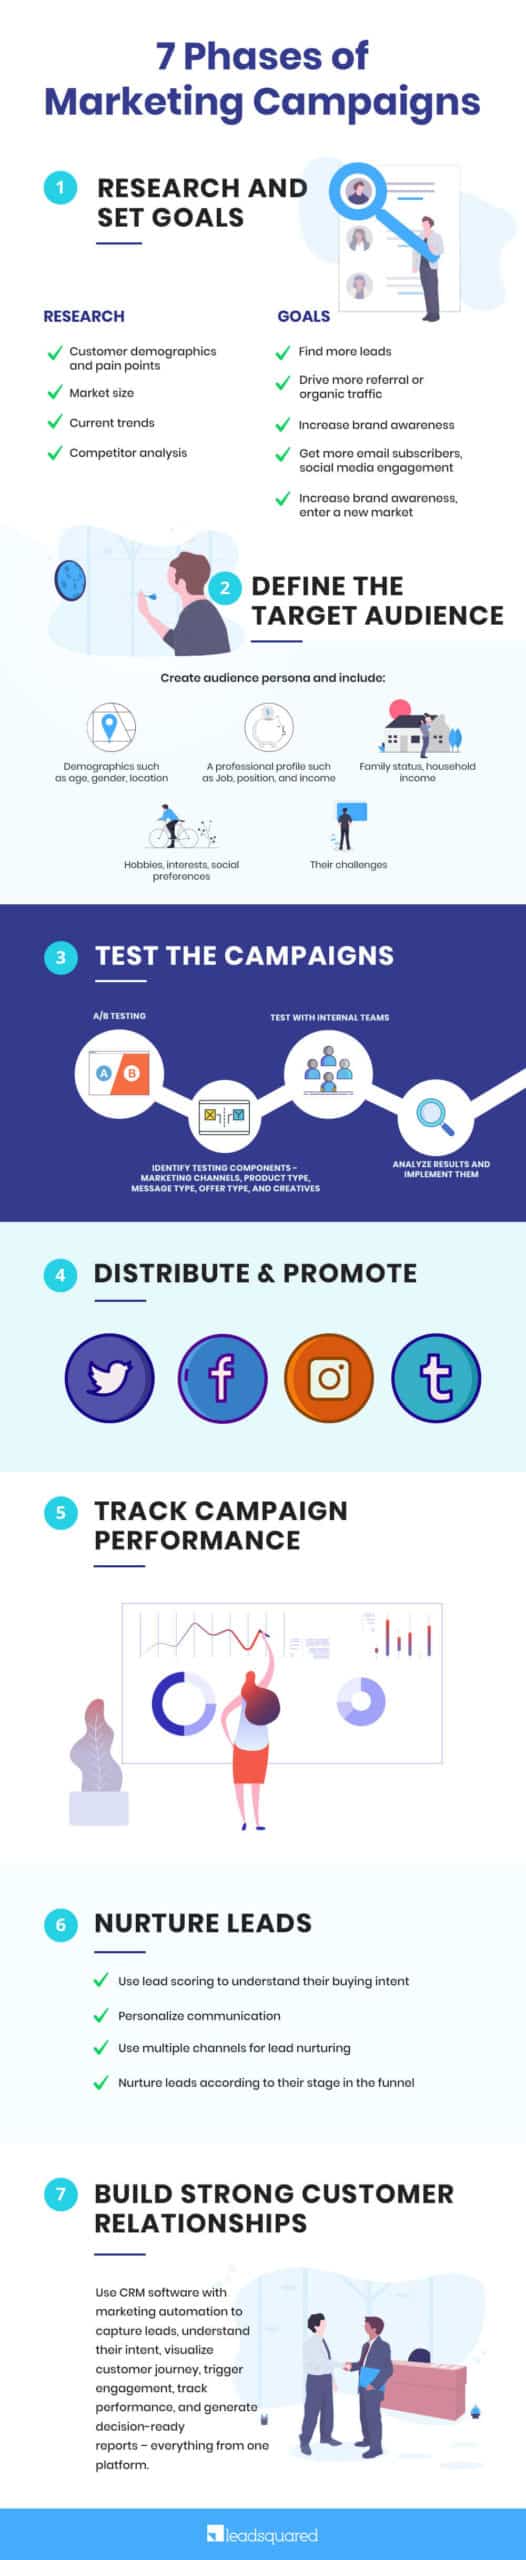 marketing-campaign-phases-infographic-scaled